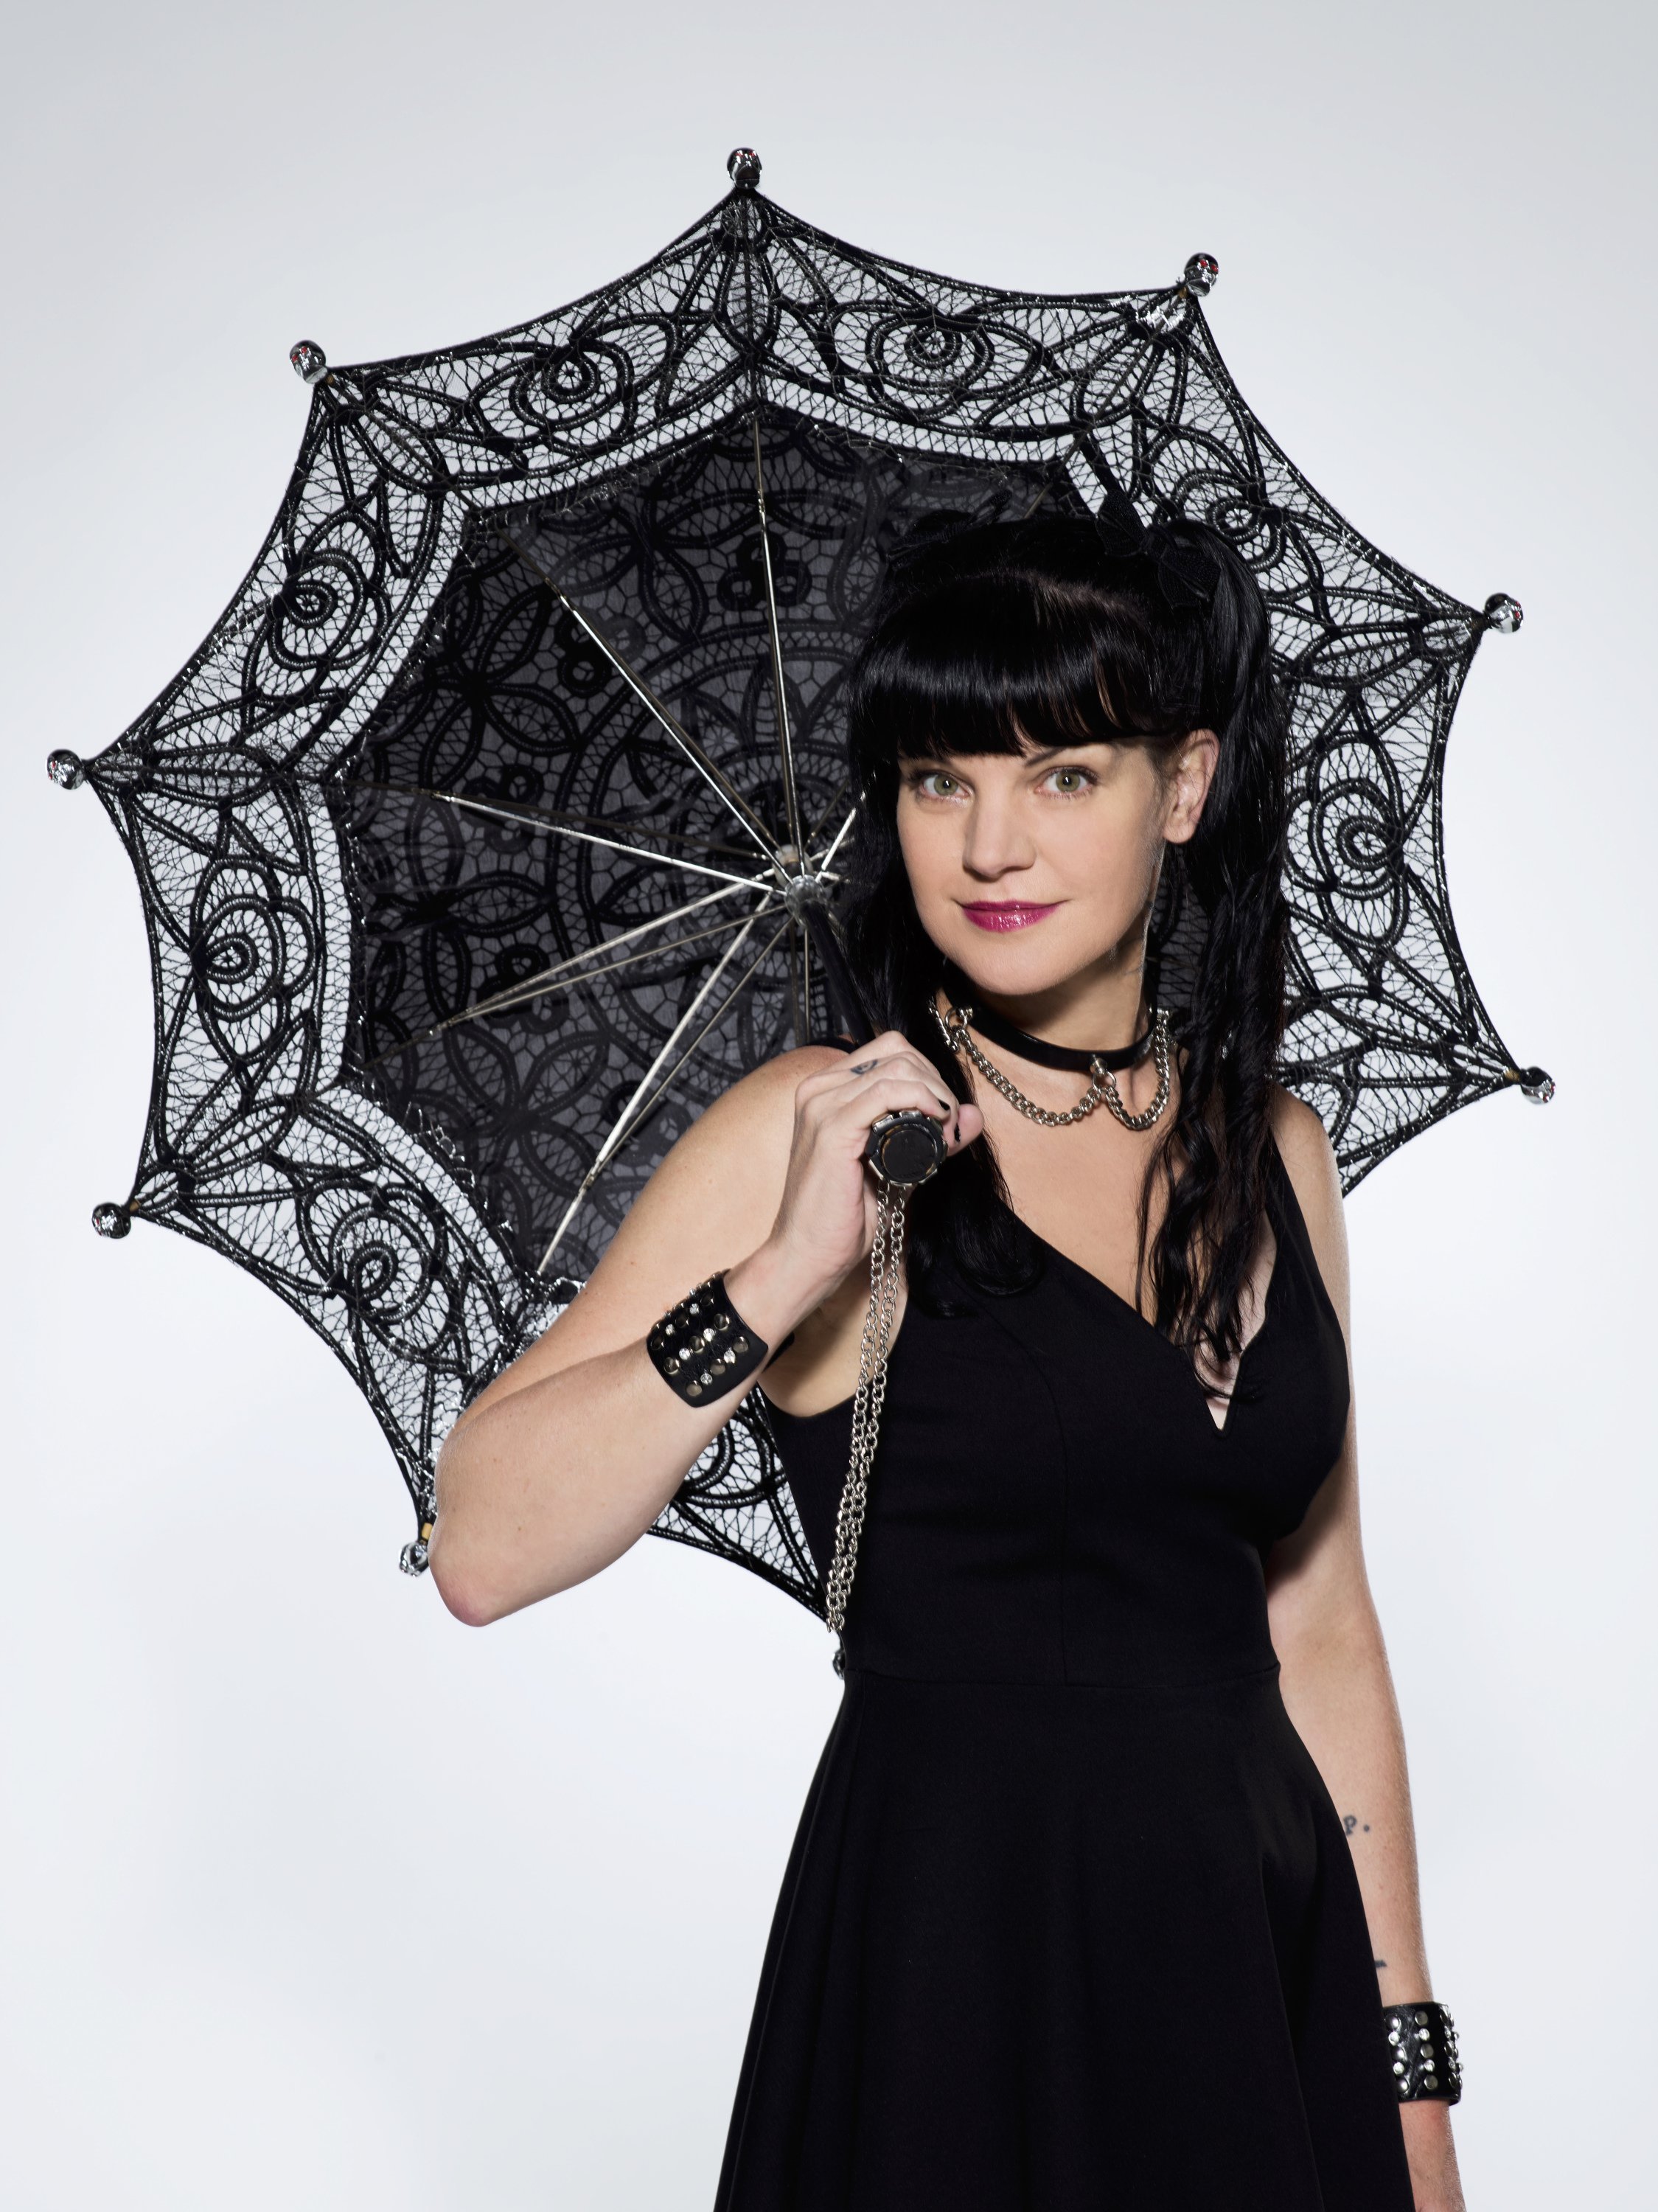  Pauley Perrette on the set of the CBS series NCIS, scheduled to air on the CBS Television Network. |Photo: Getty Images